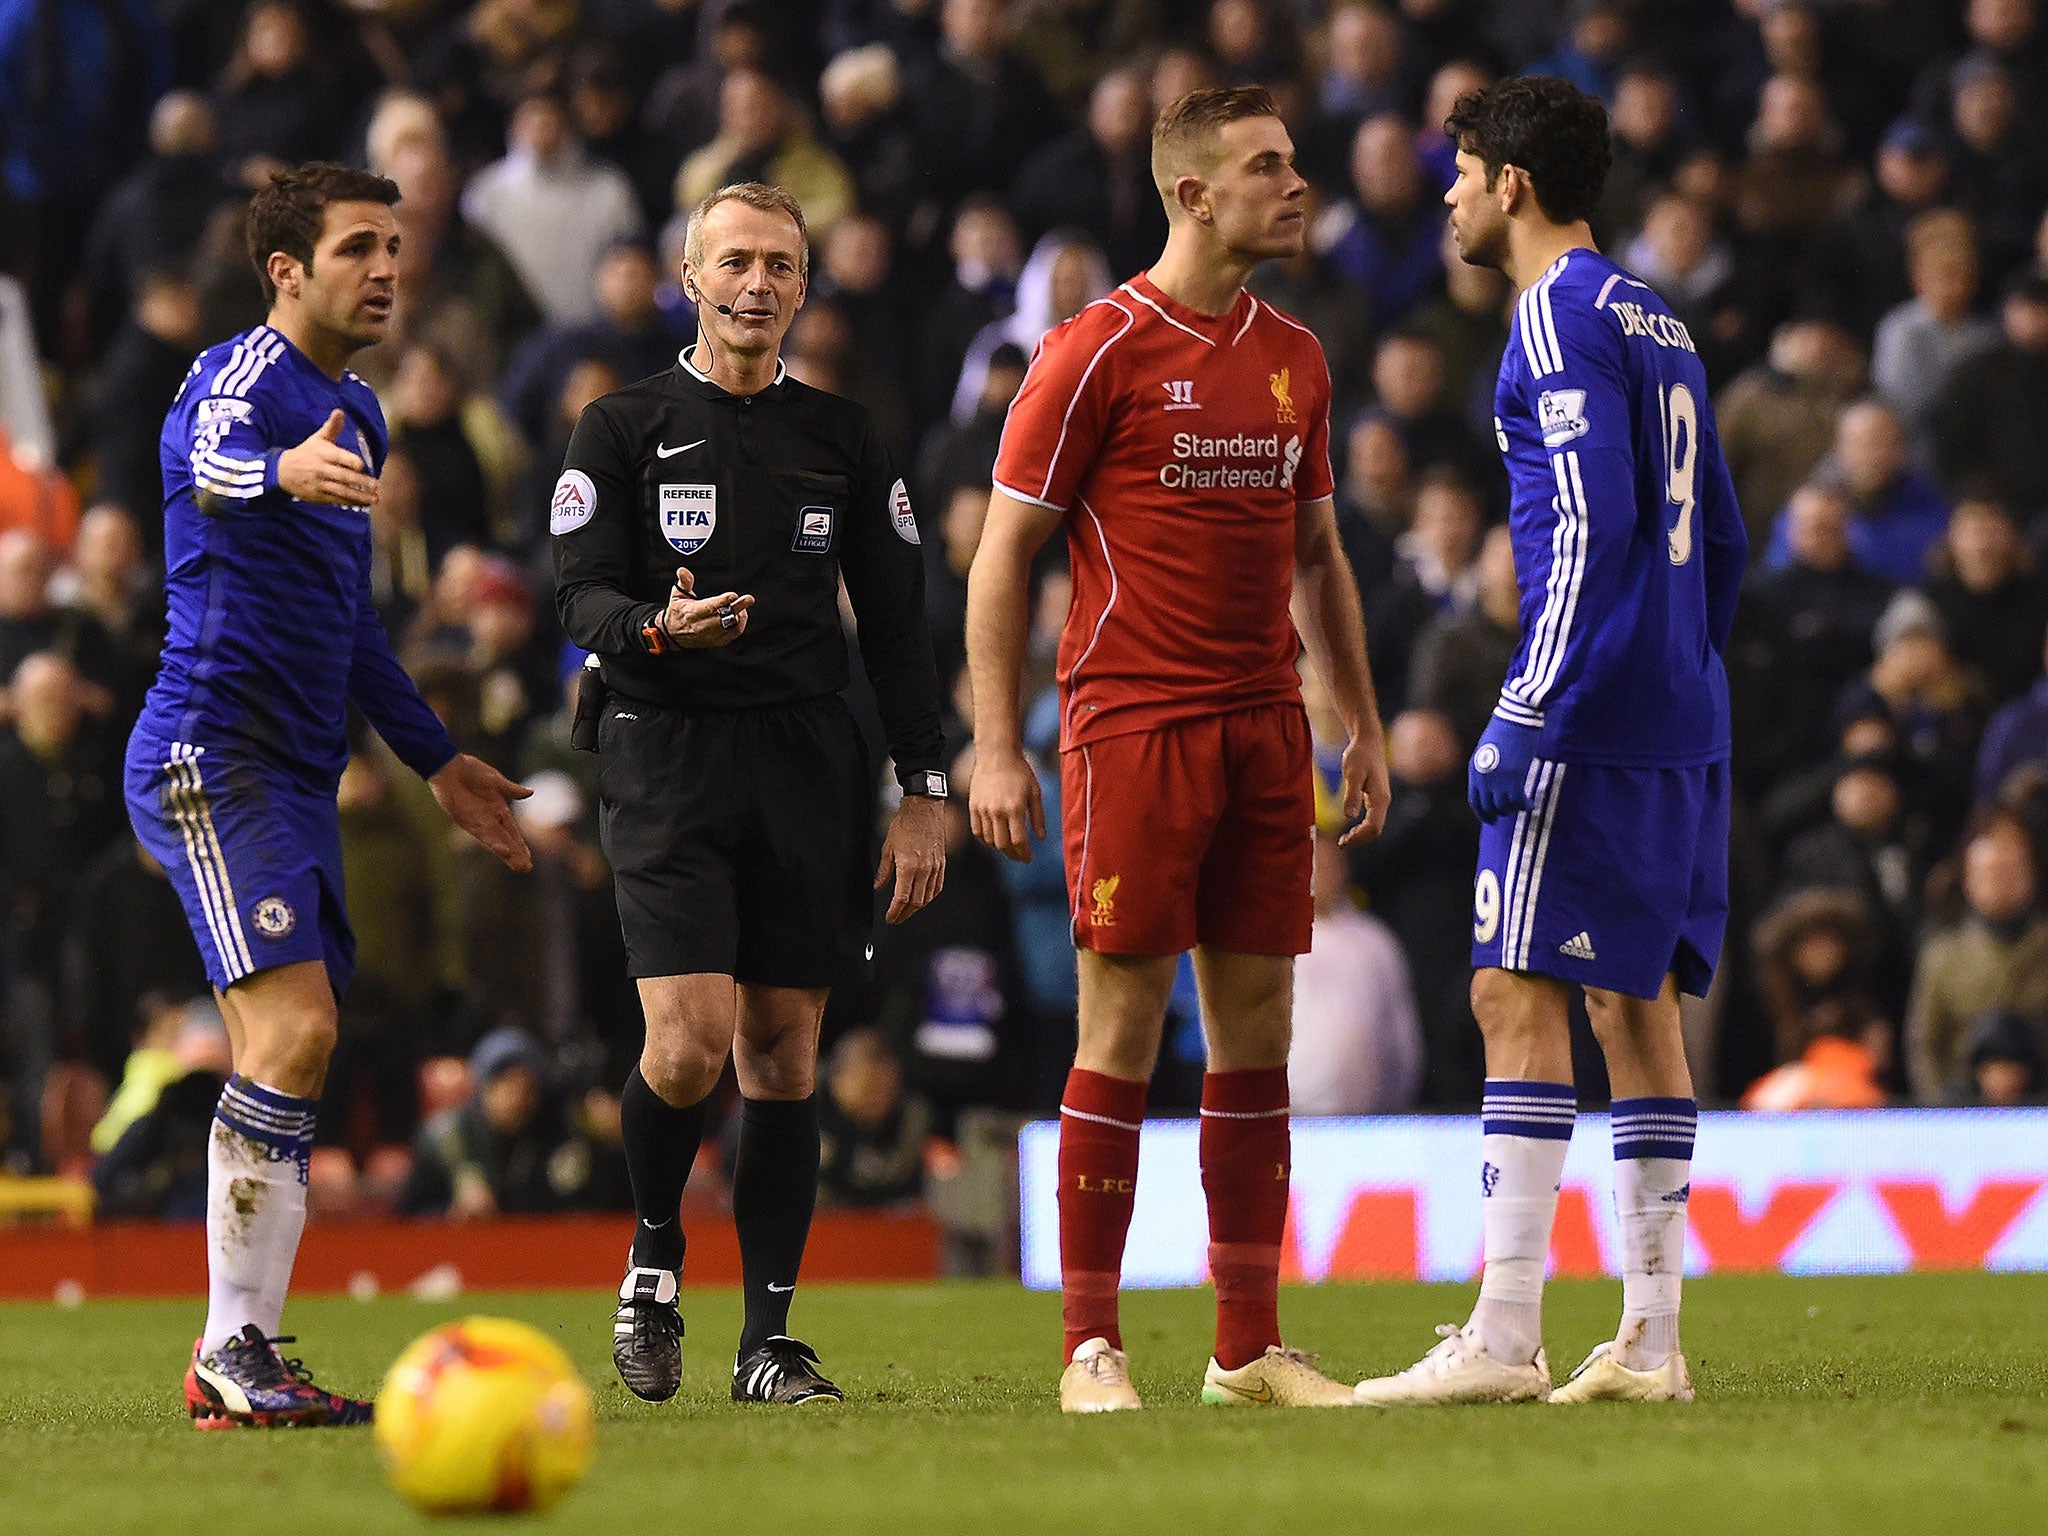 Jordan Henderson and Diego Costa clashed during the 1-1 draw between Liverpool and Chelsea